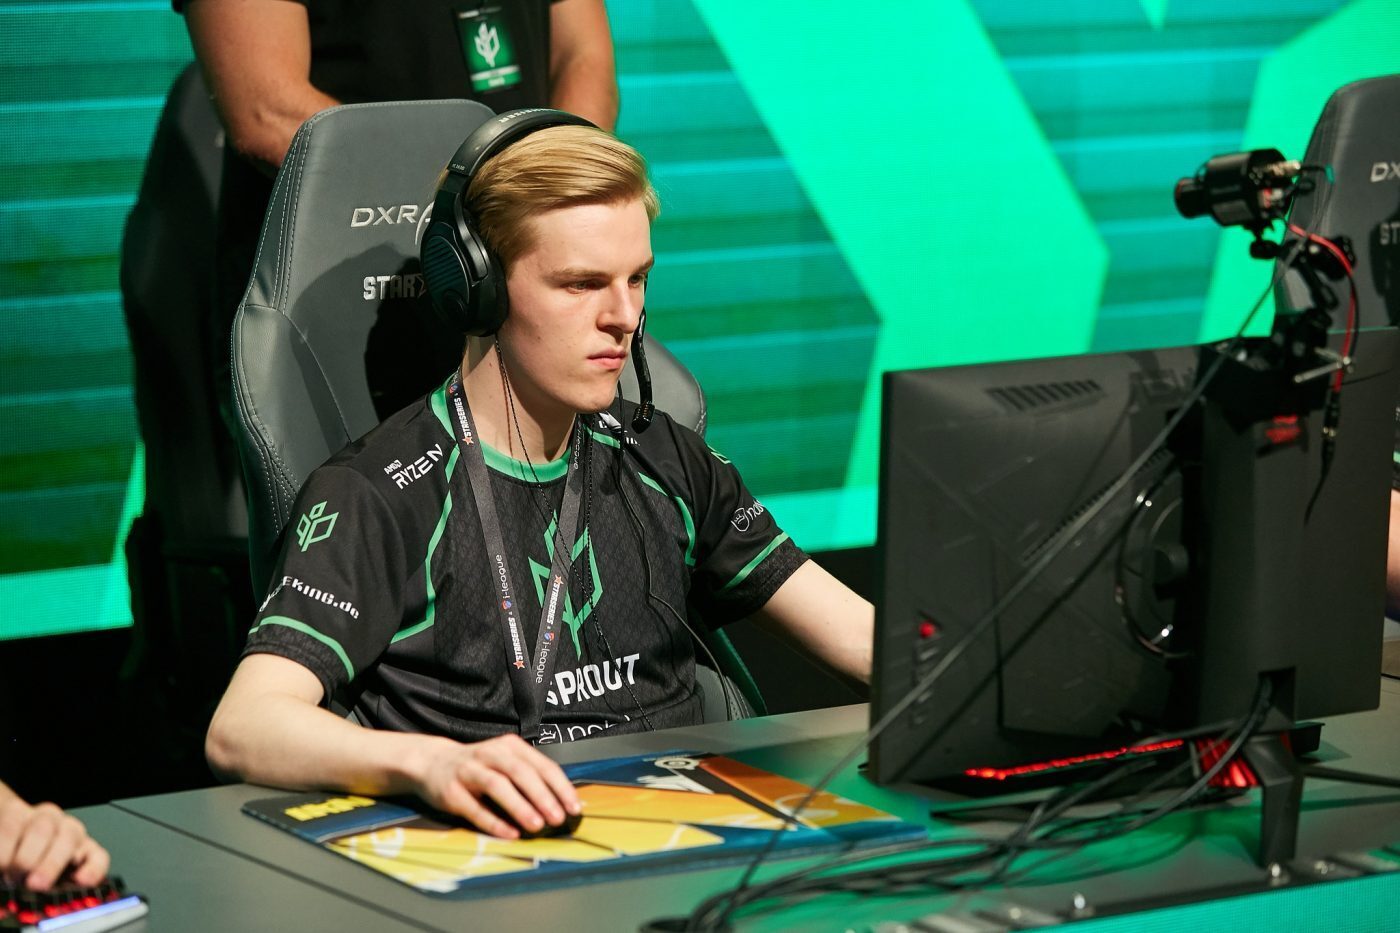 Niels-Christian “NaToSaphiX” Sillassen joins Heroic's CS:GO team after a period of free agency. (Photo courtesy of StarLadder)